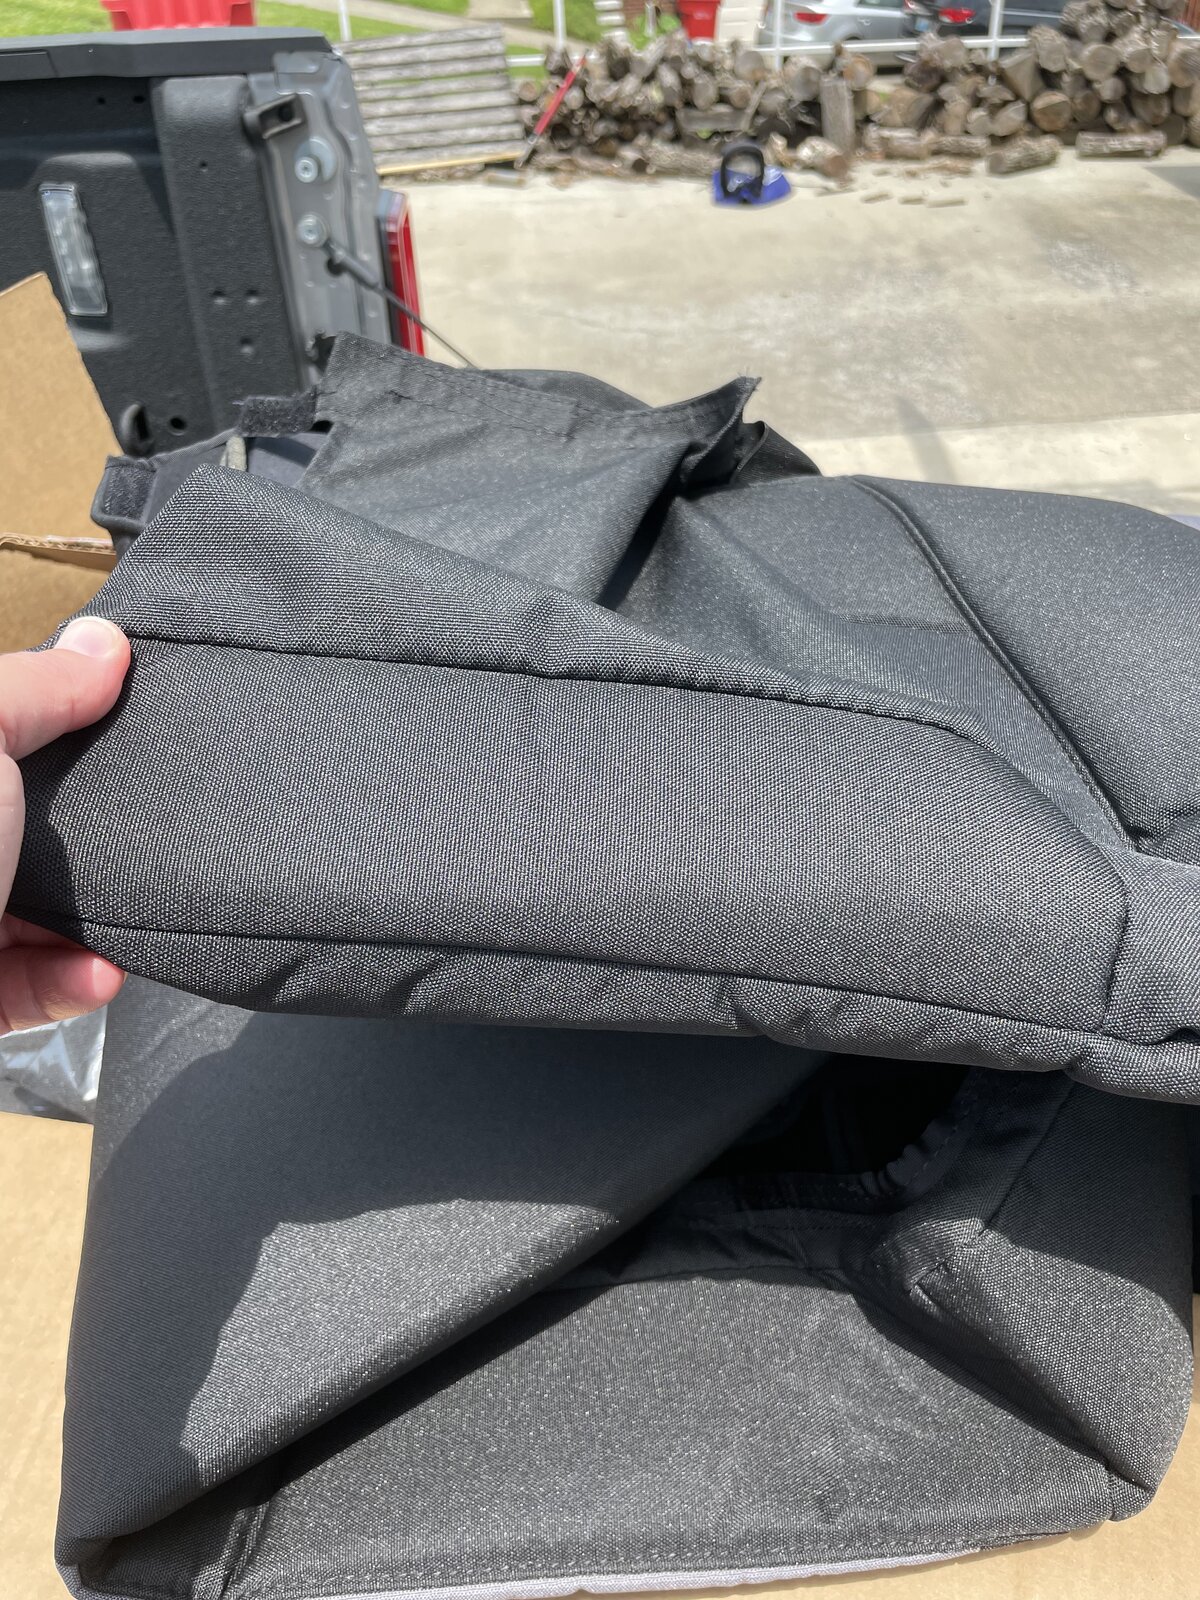 Best seat covers for the Gladiator? | Page 10 | Jeep Gladiator Forum